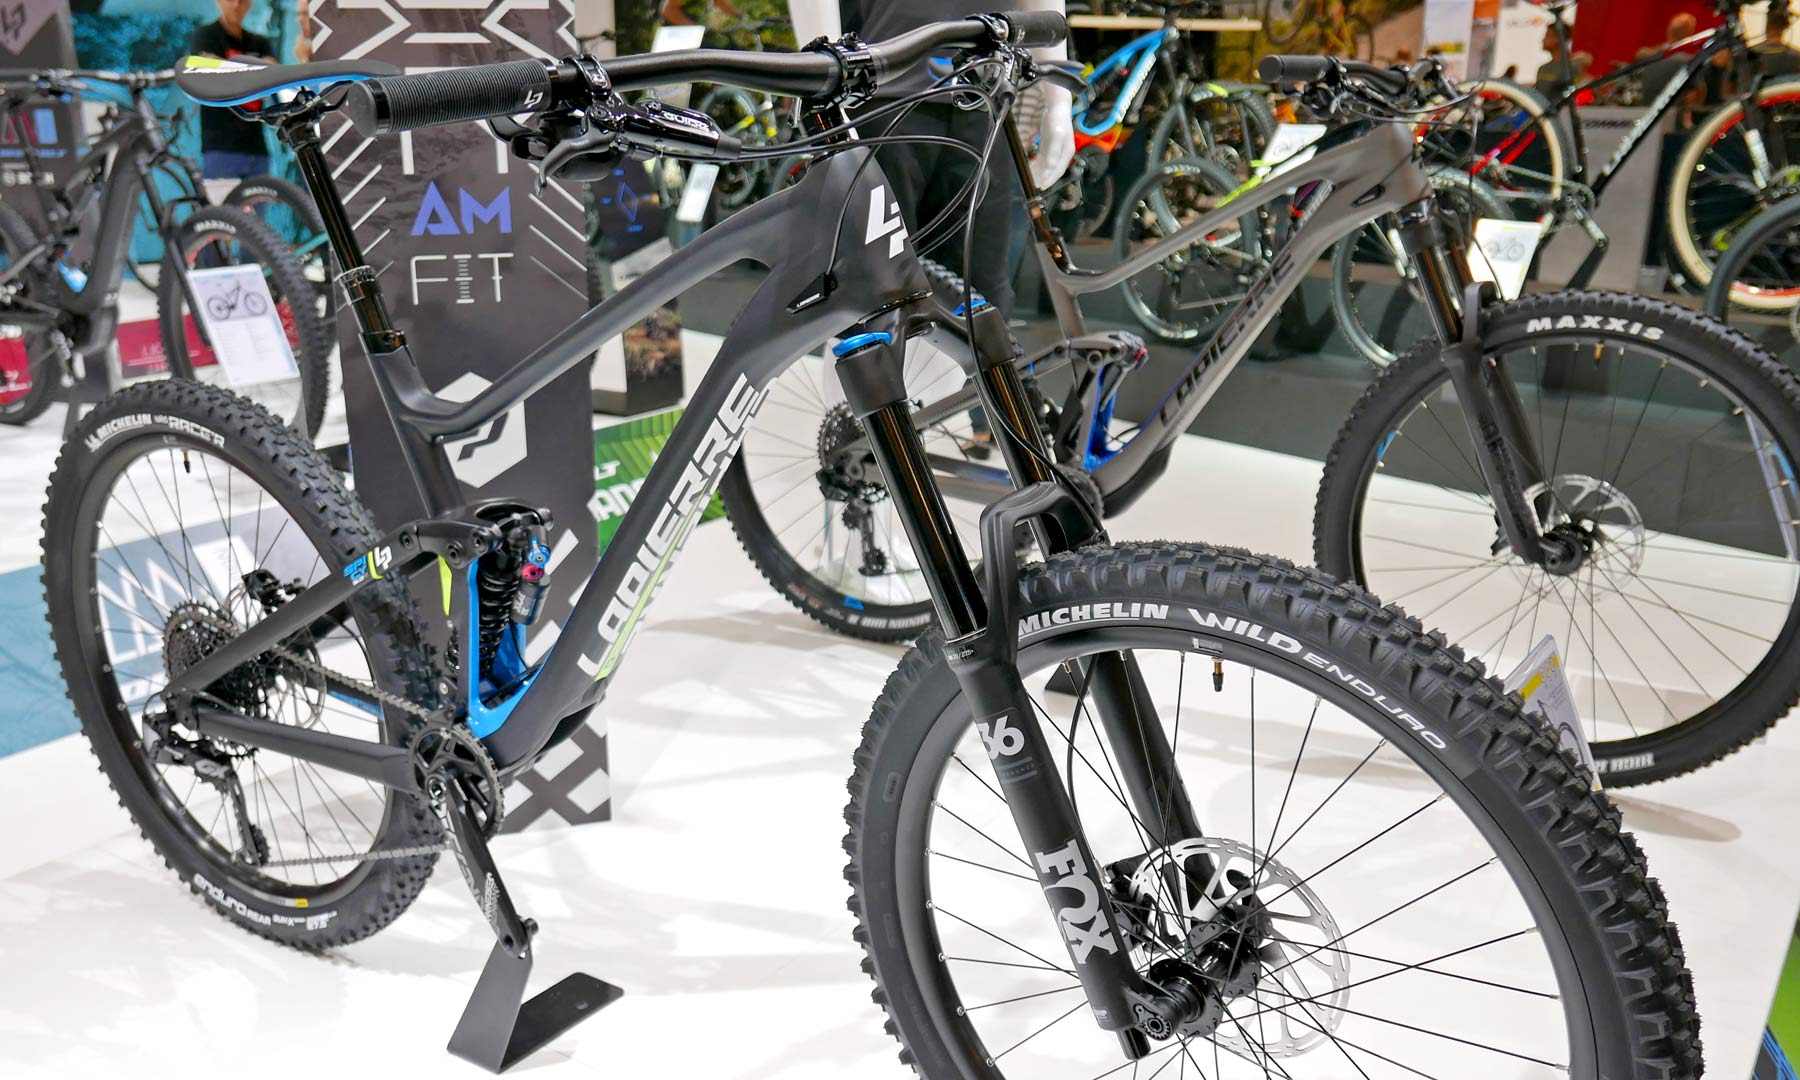 EB18: Get two (or four) trail bikes in one w/ new Lapierre Zesty & Spicy